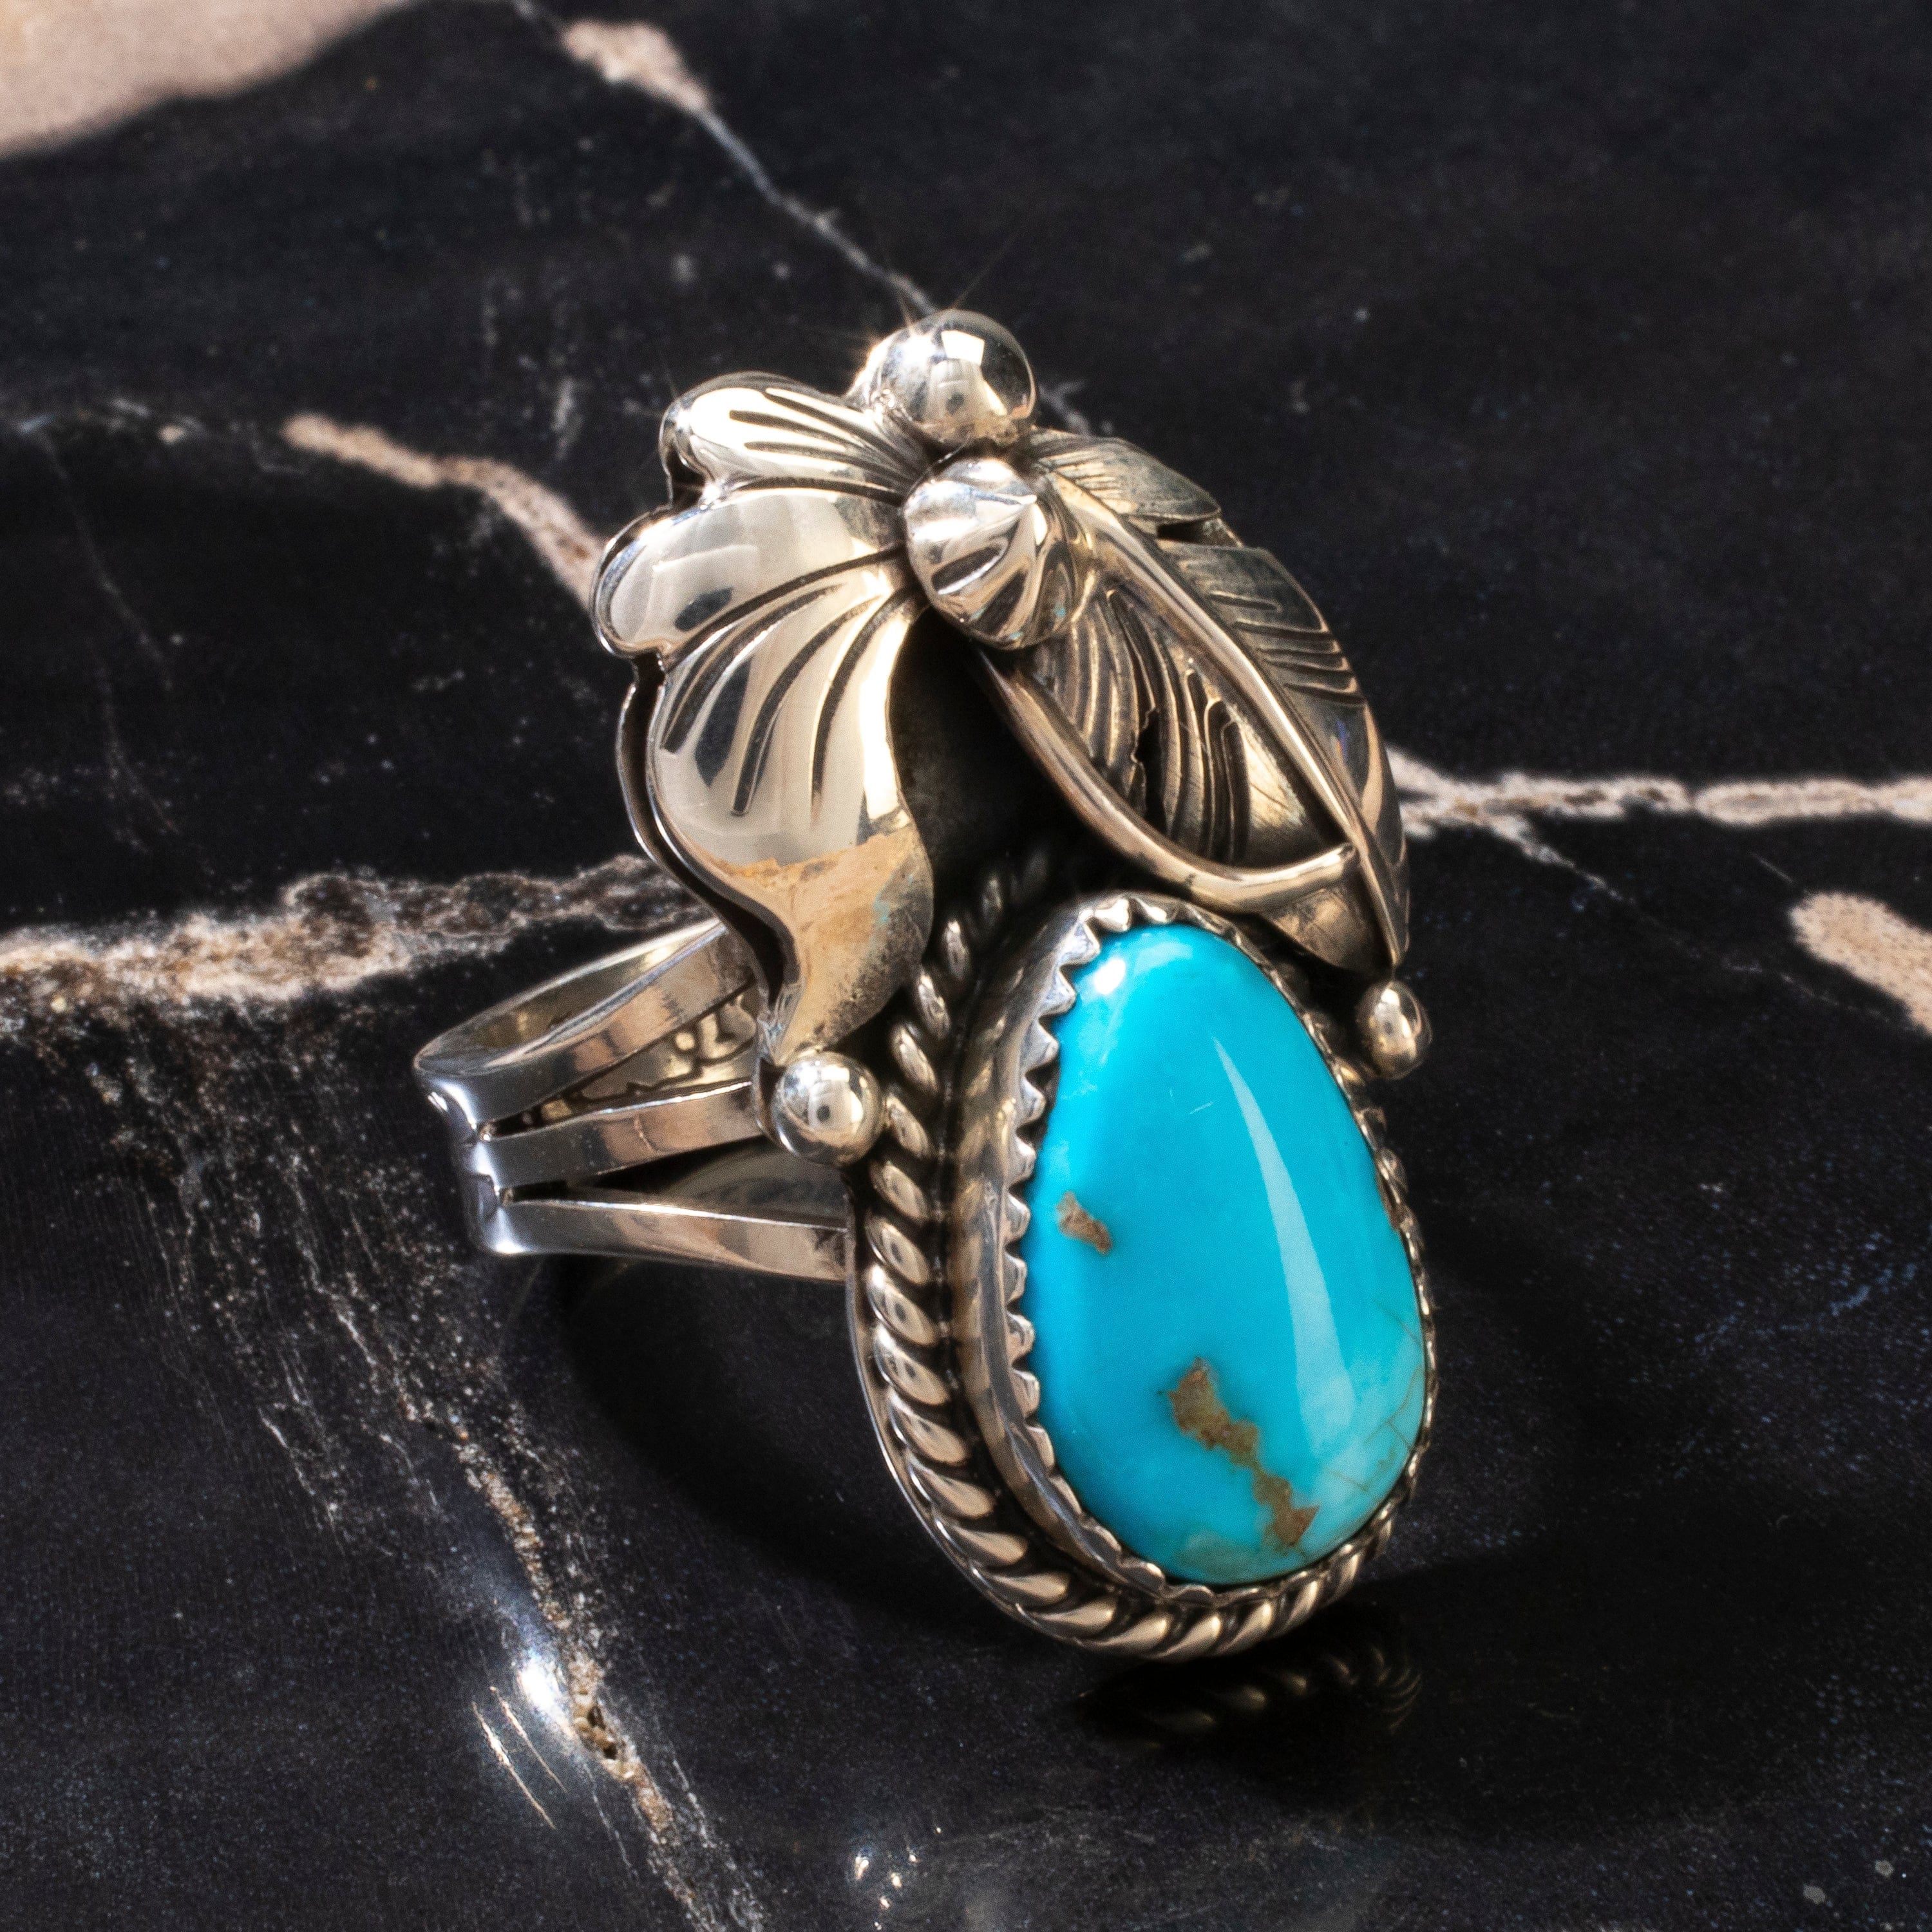 Kalifano Native American Jewelry 7 Joe Piaso Jr. Sleeping Beauty Turquoise Feather Navajo USA Native American Made 925 Sterling Silver Ring NAR600.056.7